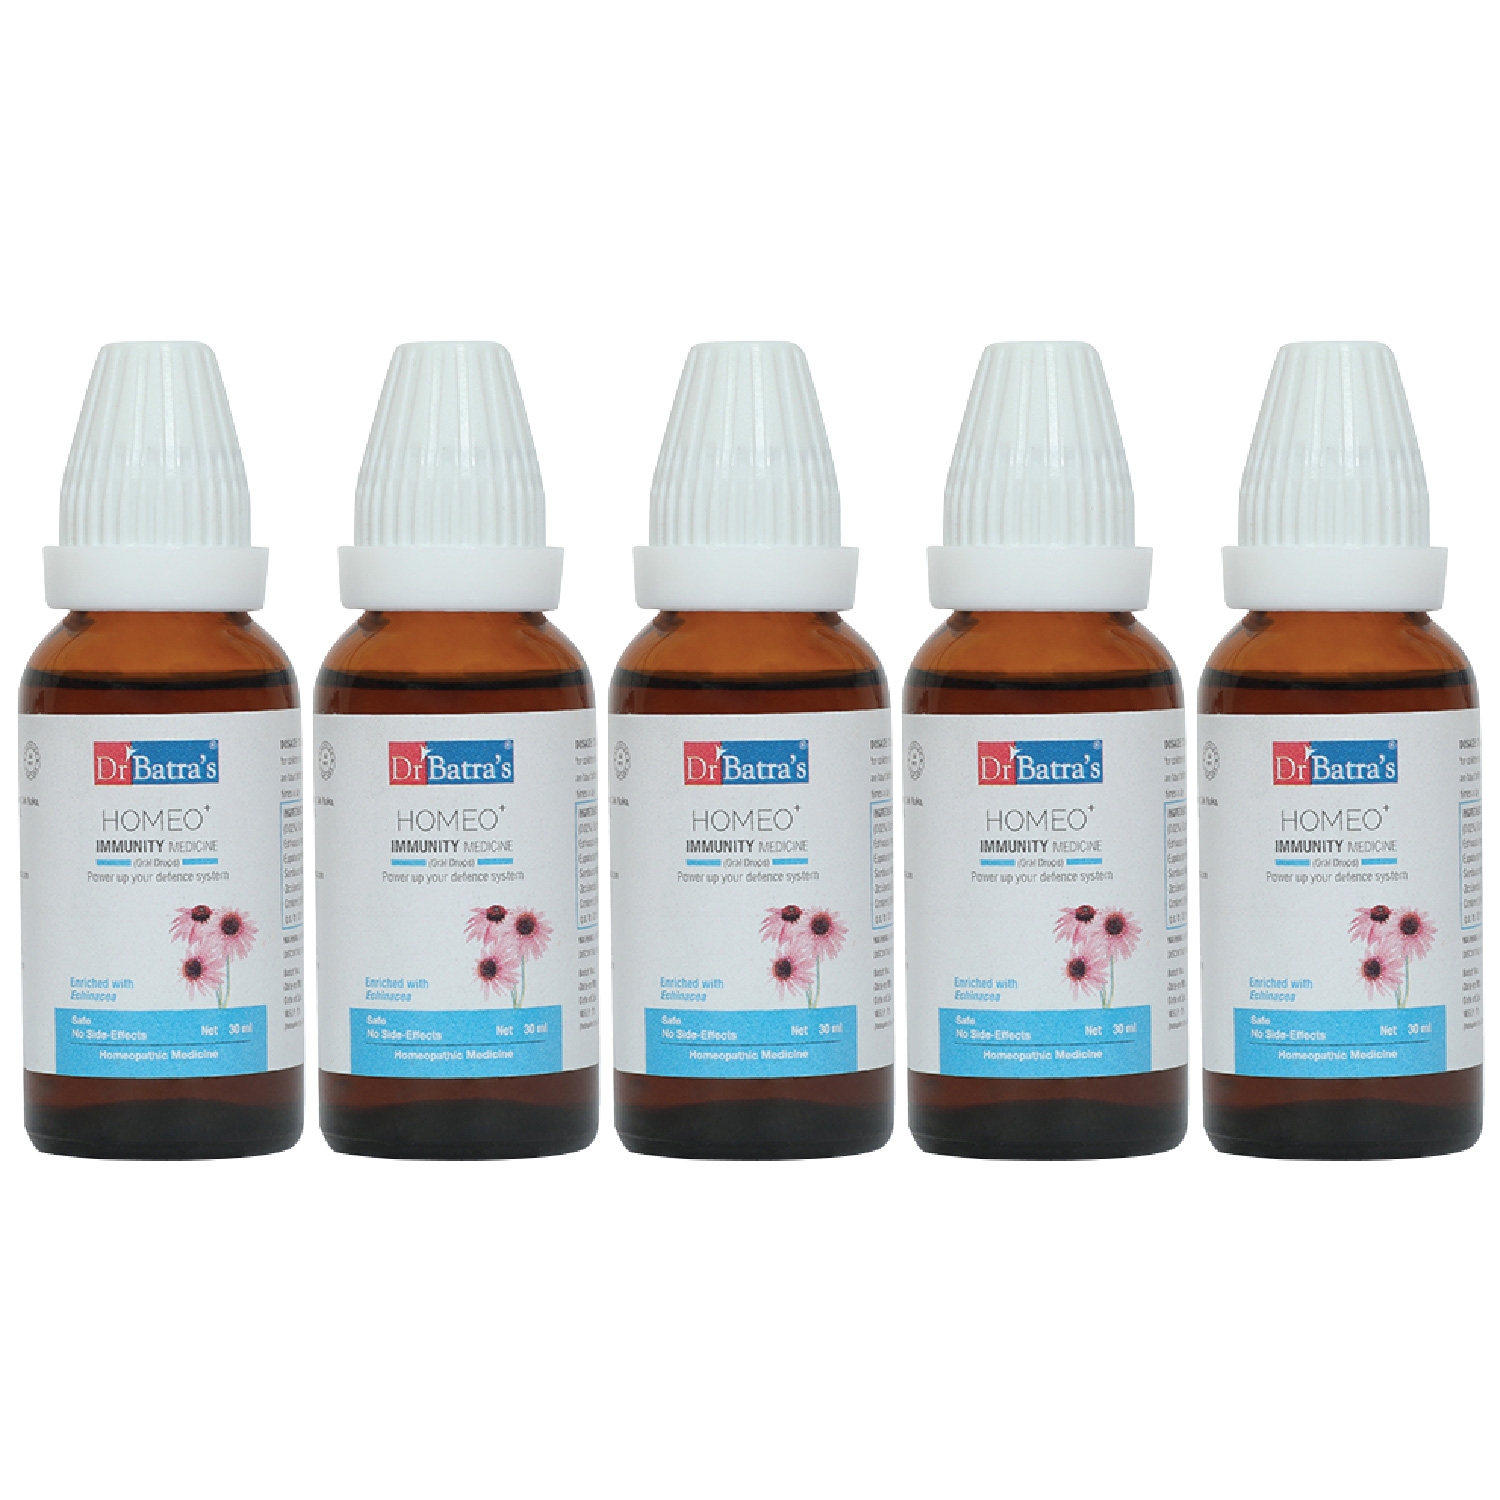 Dr Batra's | Dr Batra's Homeo+ Immunity Medicine Oral Drops|Scientific & Natural |Stay Home, Stay Safe - 30 ml (Family Pack of 5)